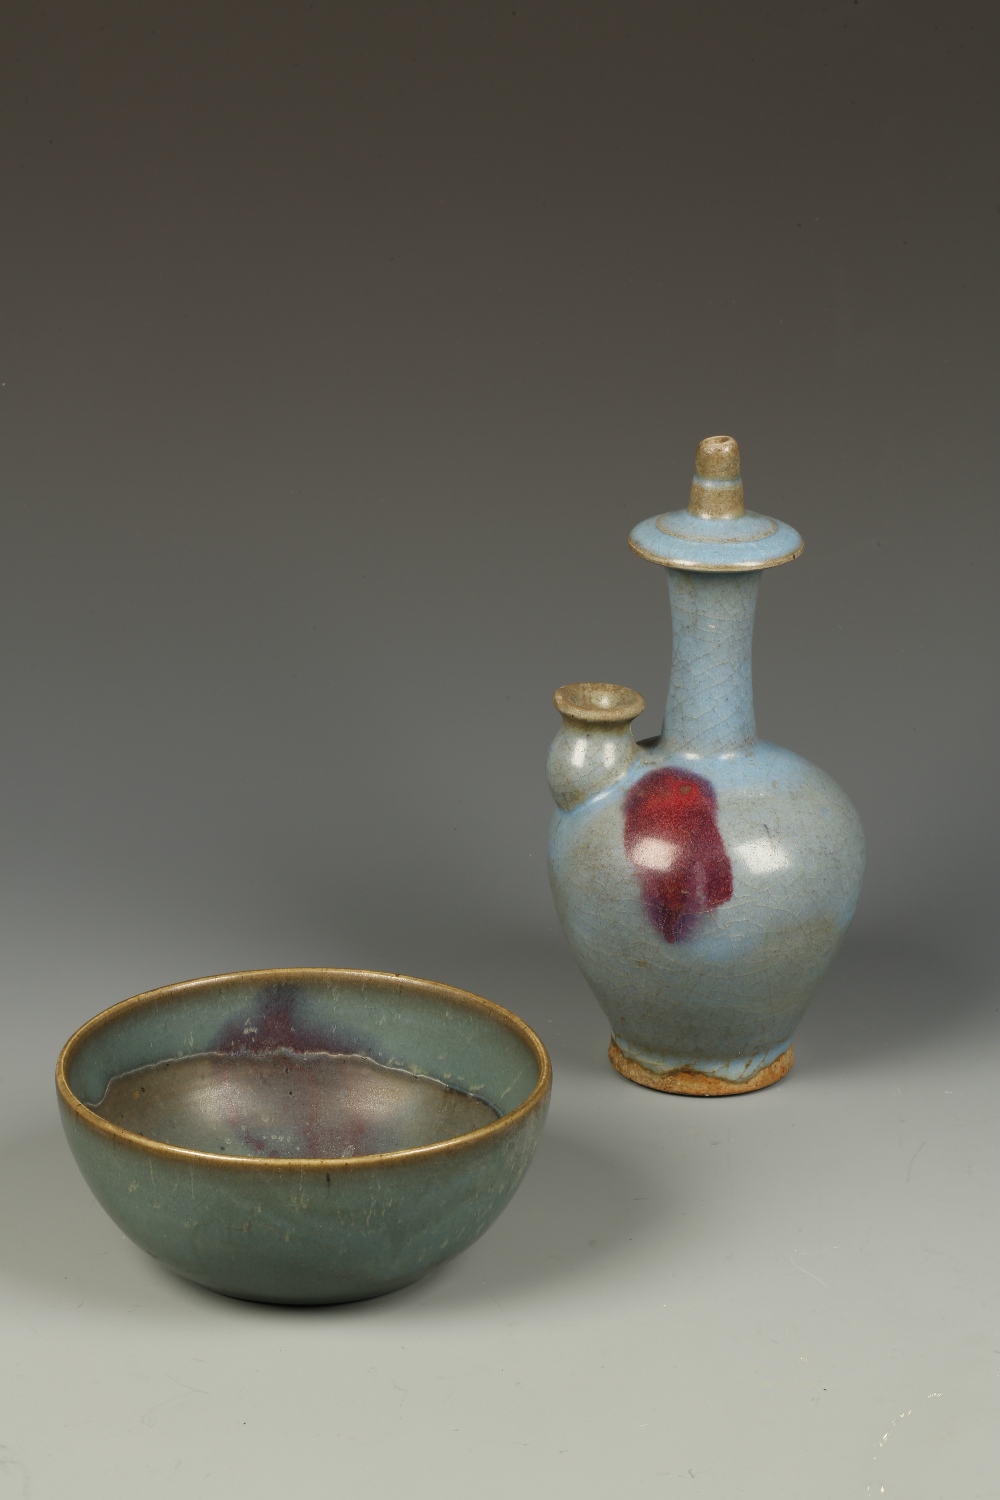 A CHINESE JUN STYLE WATER DROPPER, one side with a purple splash, 9"" high; and a Jun style bowl,